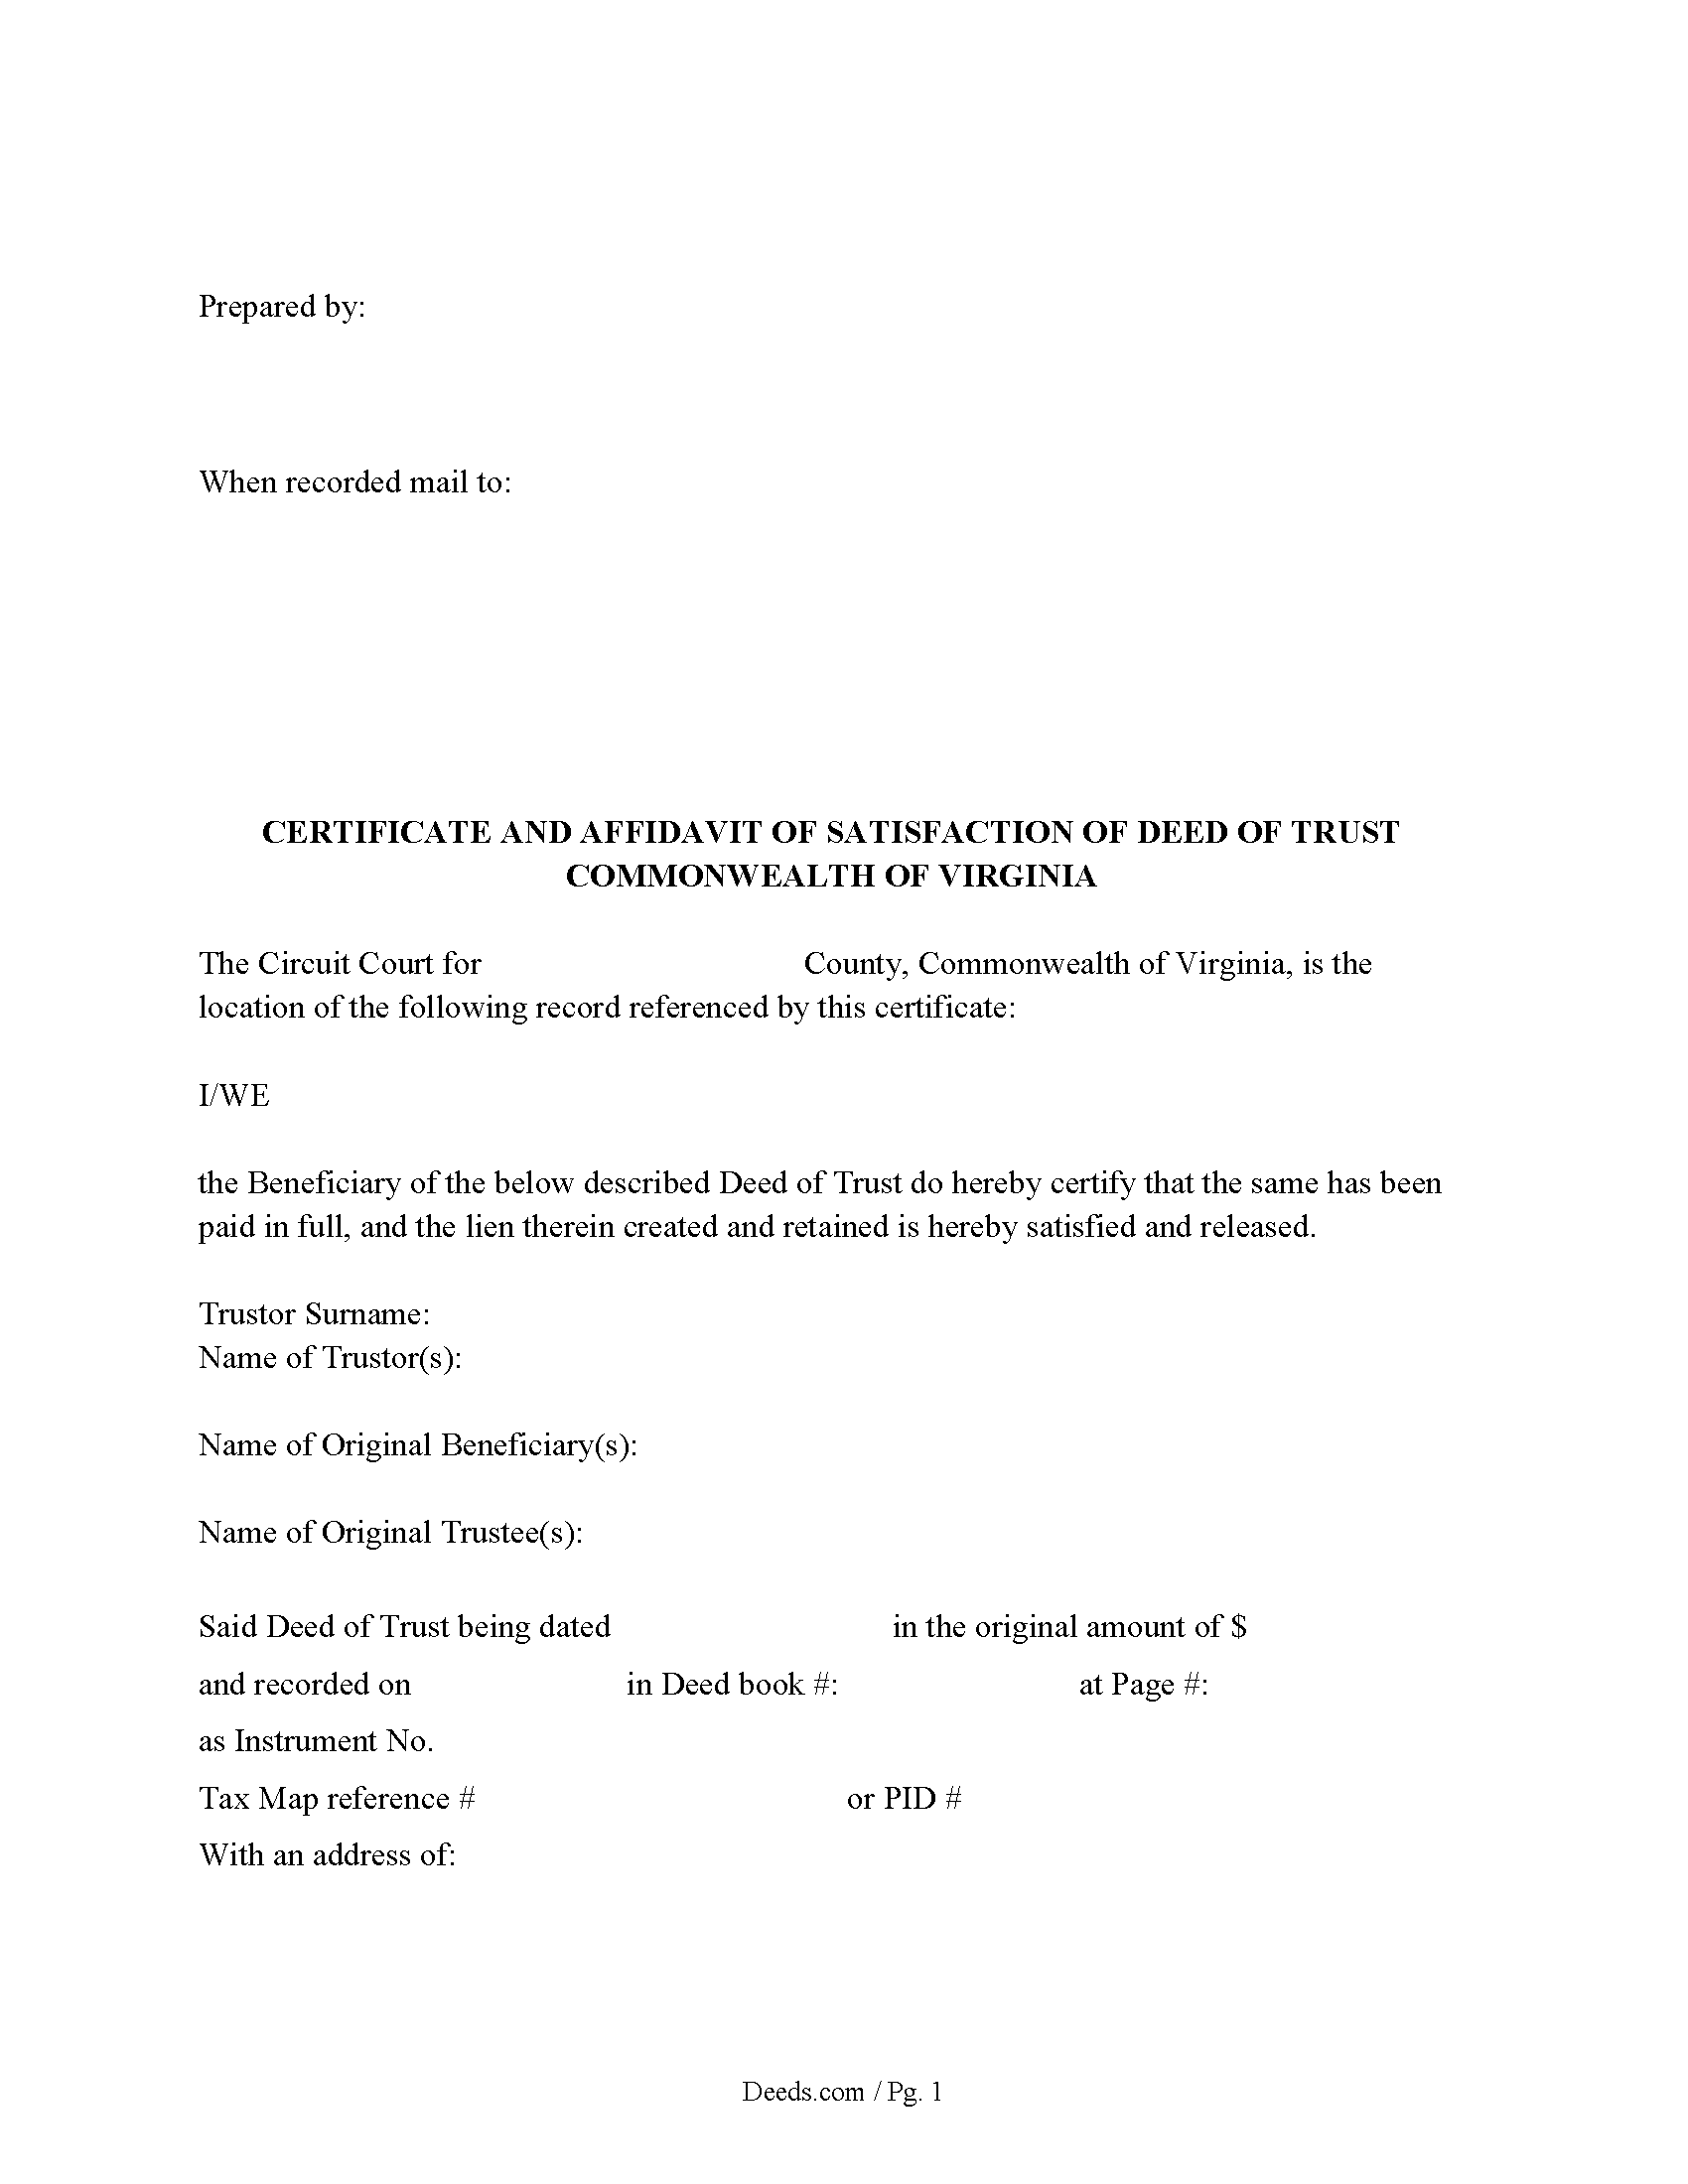 Certificate and Affidavit of Satisfaction of Deed of Trust Form